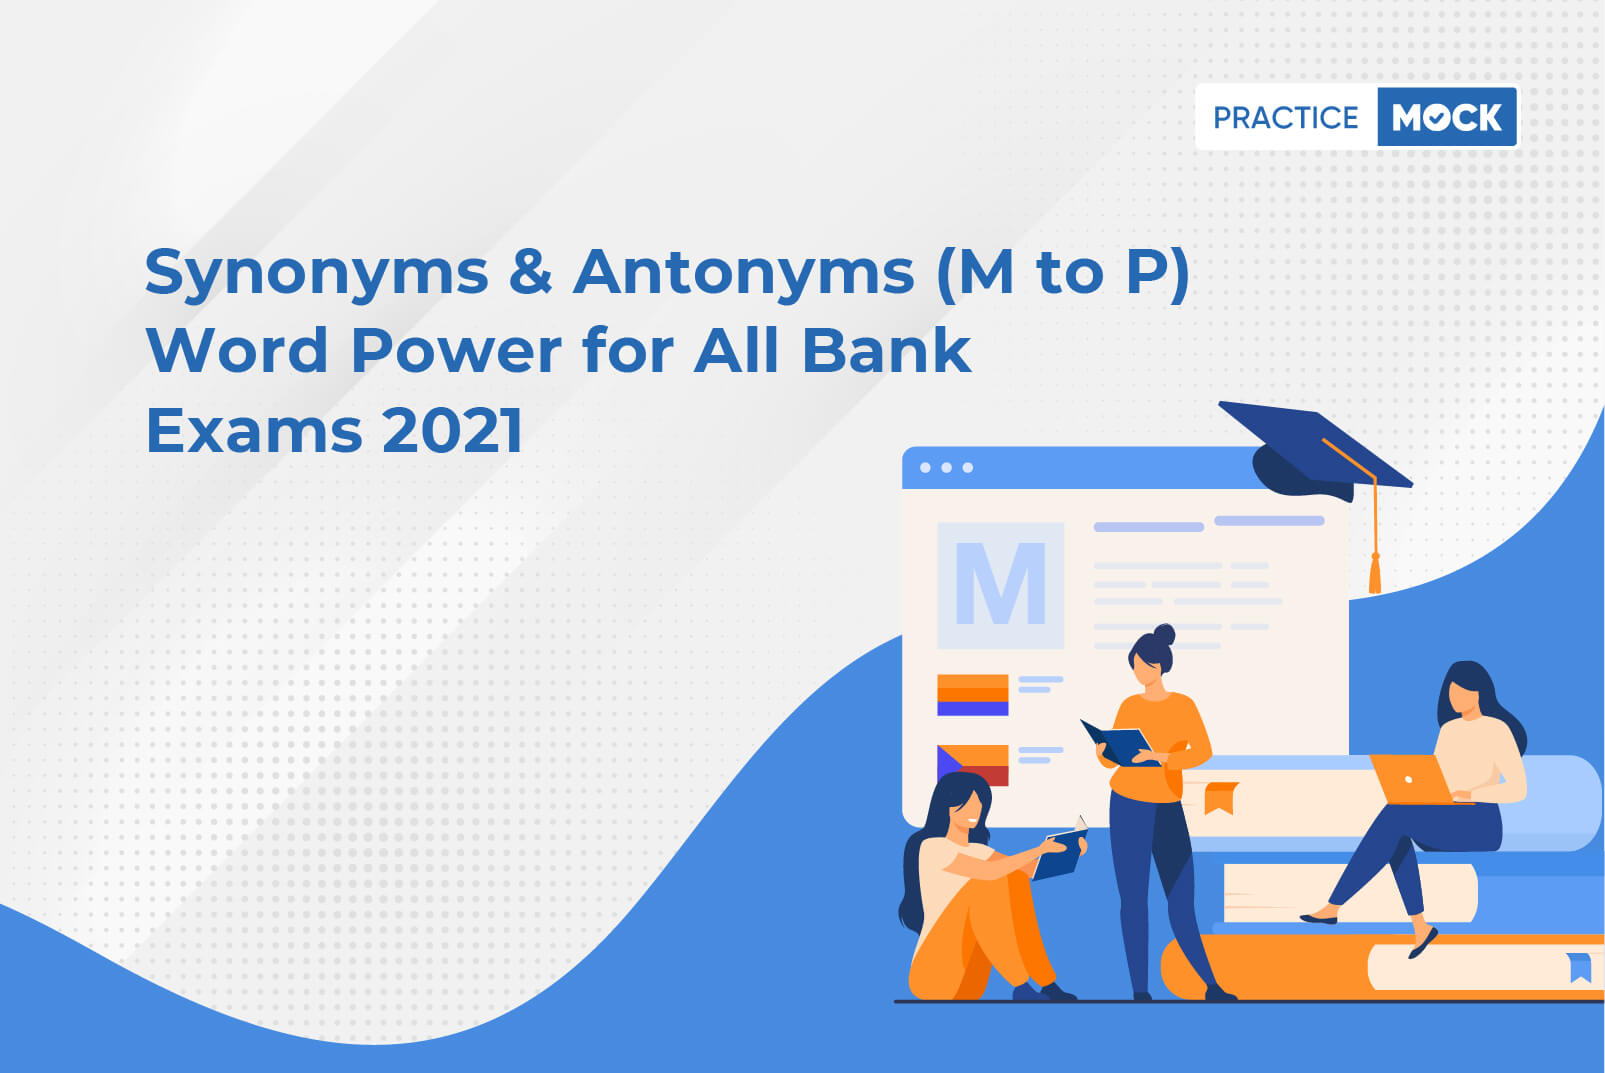 Synonyms & Antonyms (M to P)-Word Power for all Bank Exams 2021